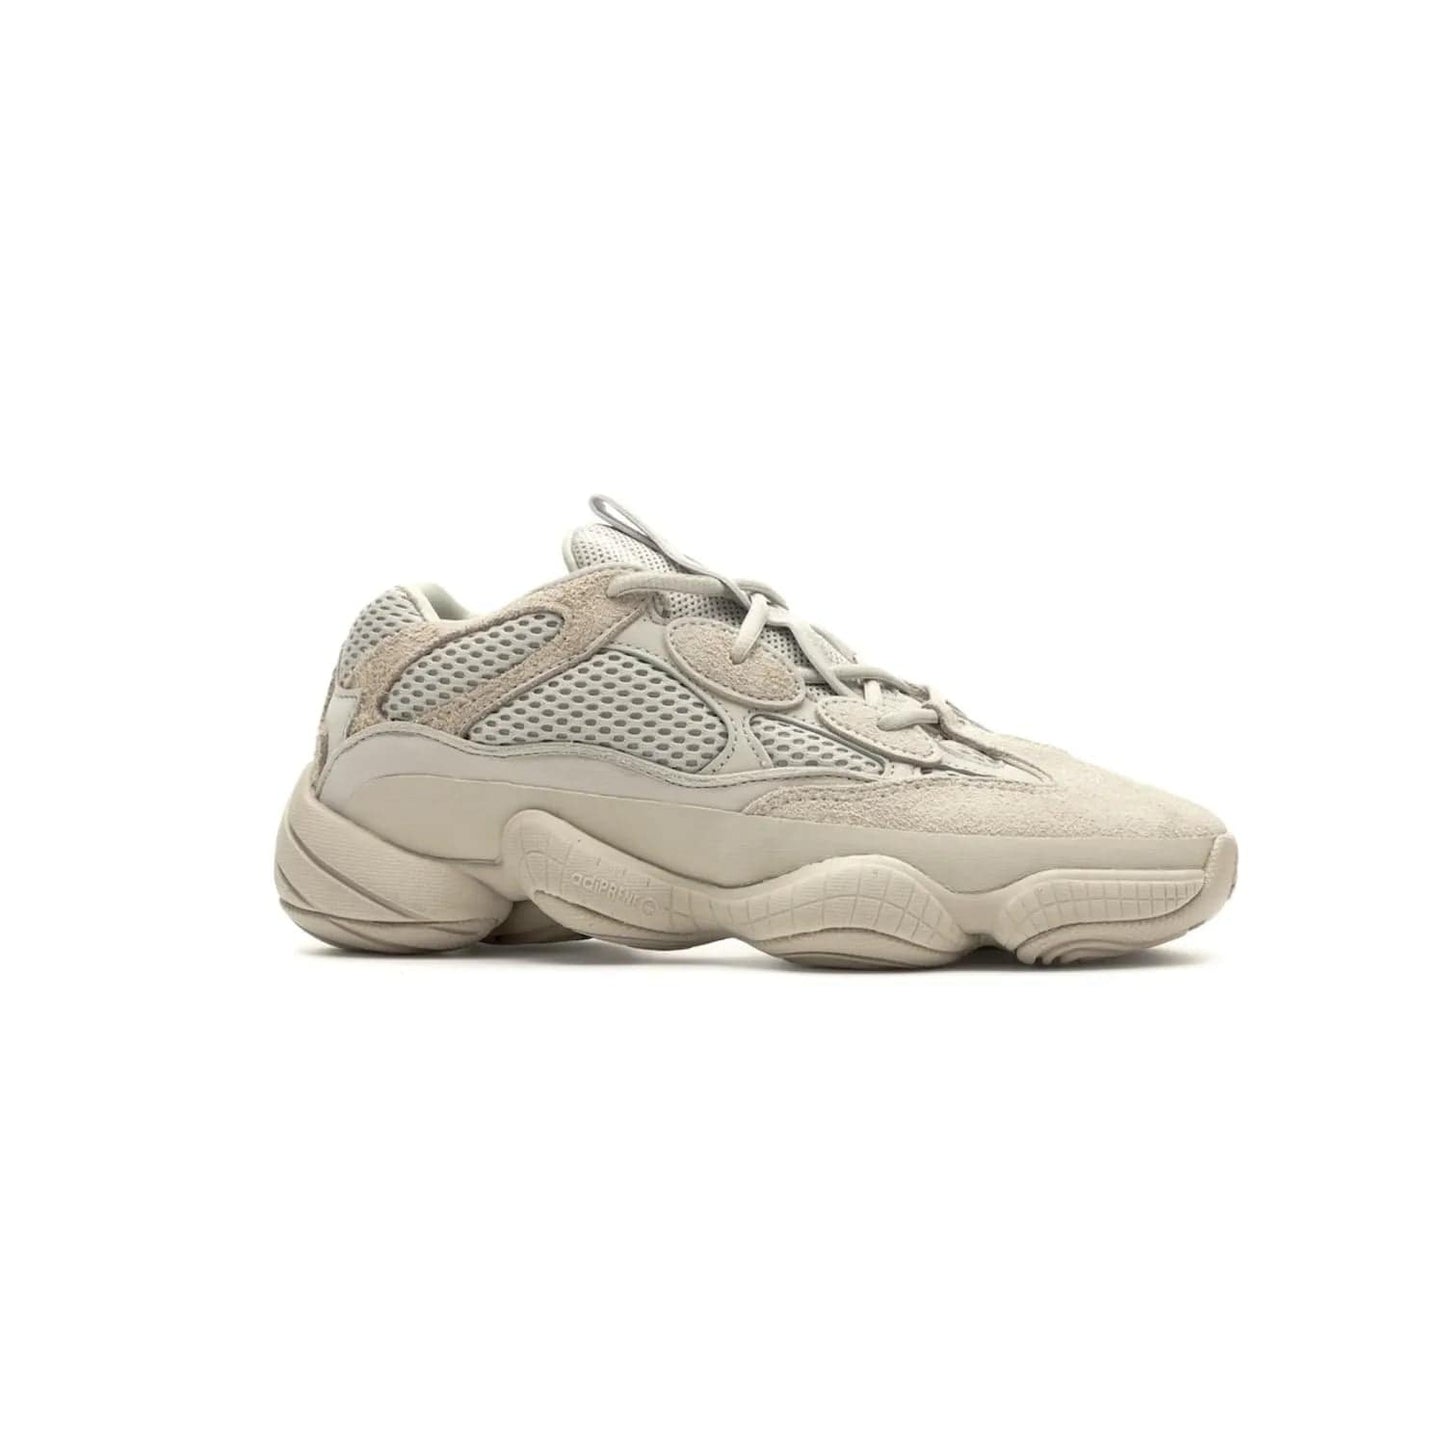 adidas Yeezy 500 Blush - Image 2 - Only at www.BallersClubKickz.com - Step up your sneaker game with the Adidas Yeezy 500 Blush. Monochromatic pale pink palette, hiking-inspired suede/mesh construction, plus adiPRENE sole for comfort and performance. Get the Adidas Yeezy 500 and experience true style and comfort.